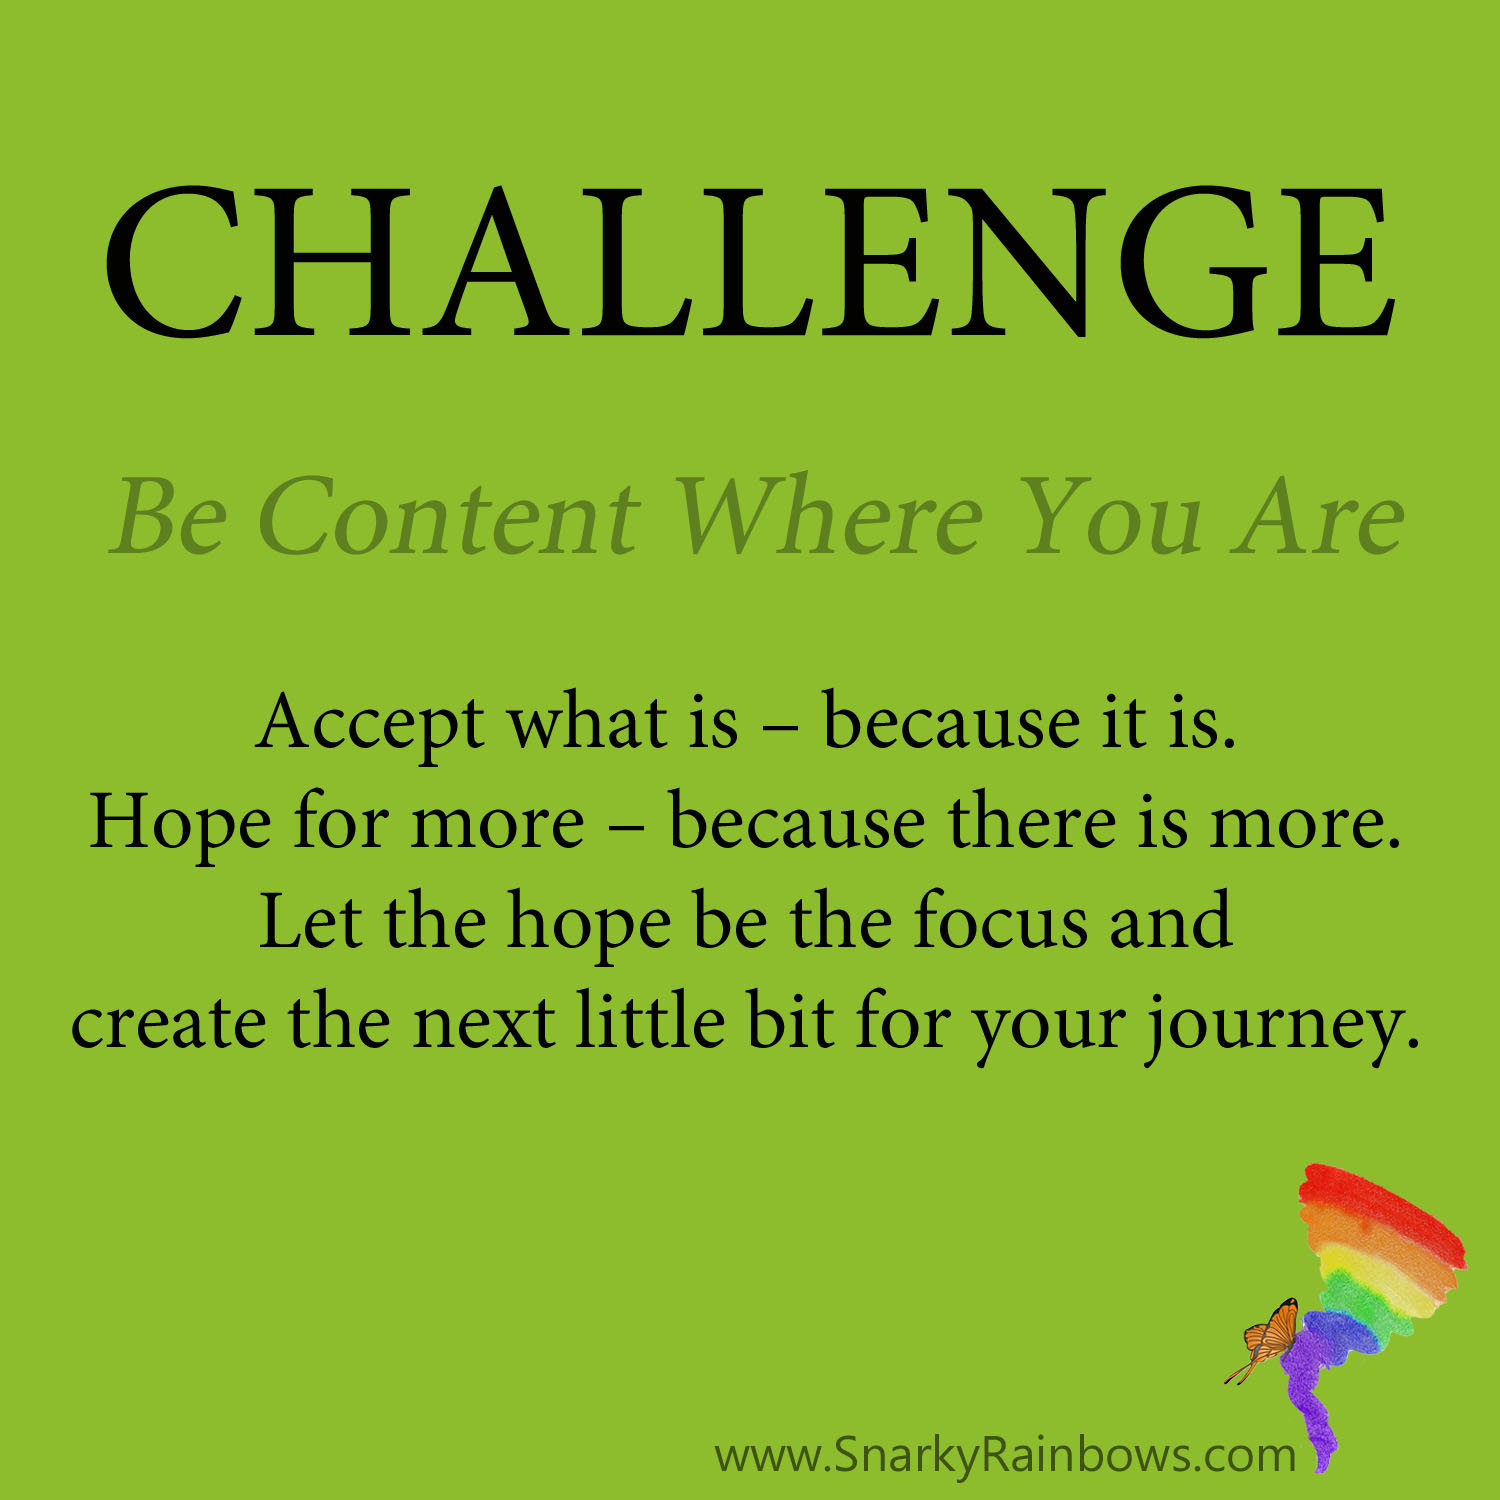 Daily Challenge - be content where you are